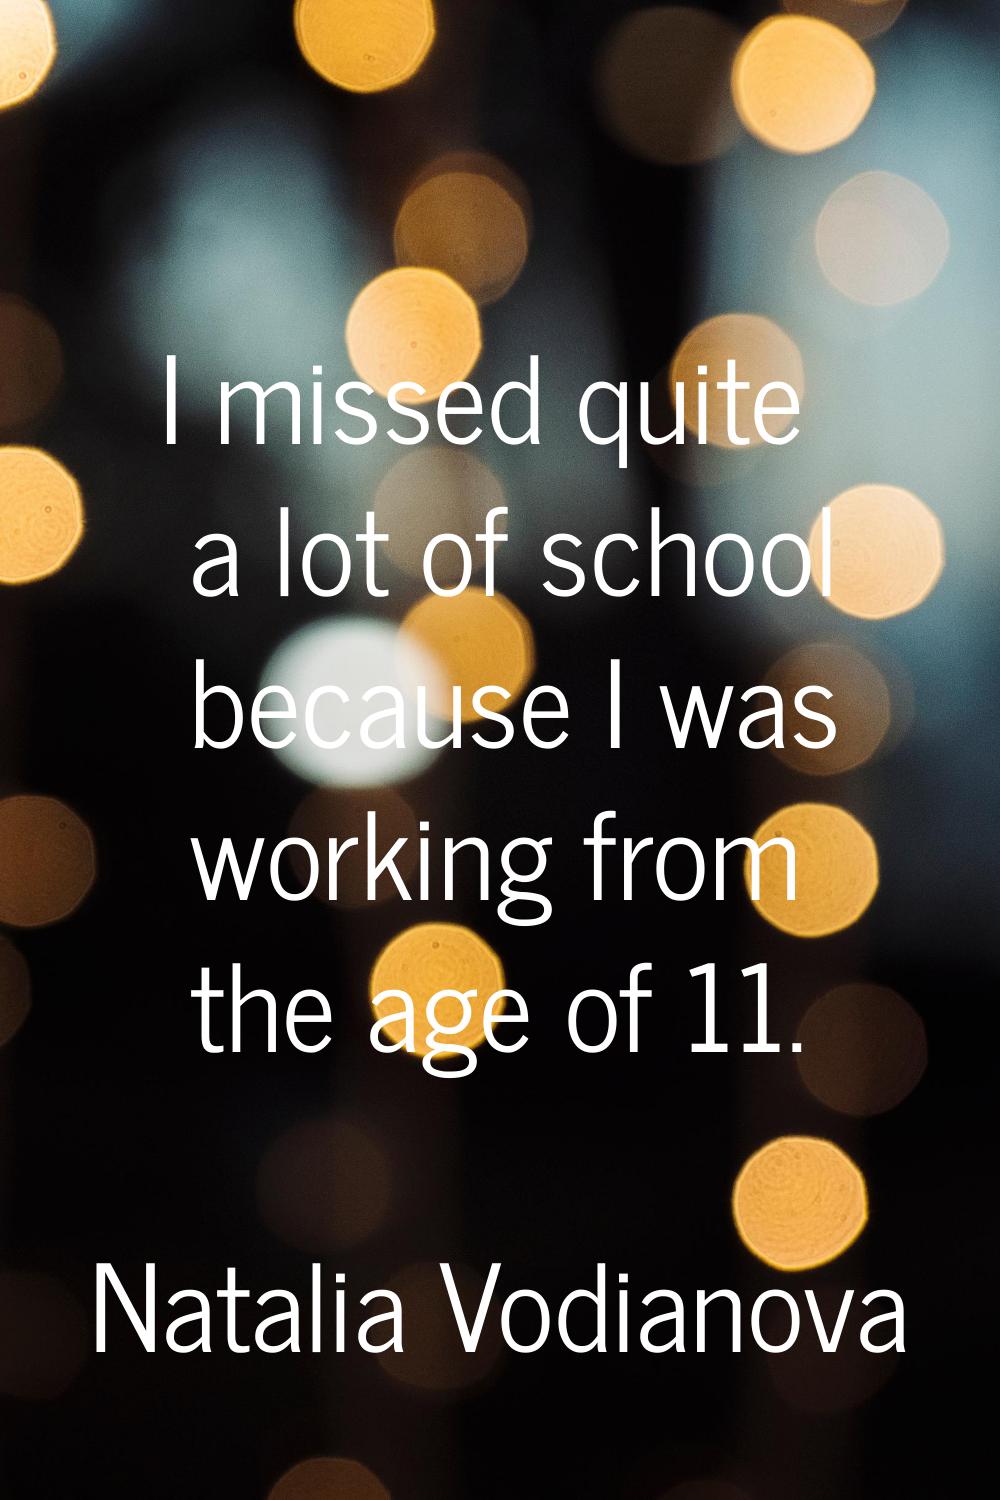 I missed quite a lot of school because I was working from the age of 11.